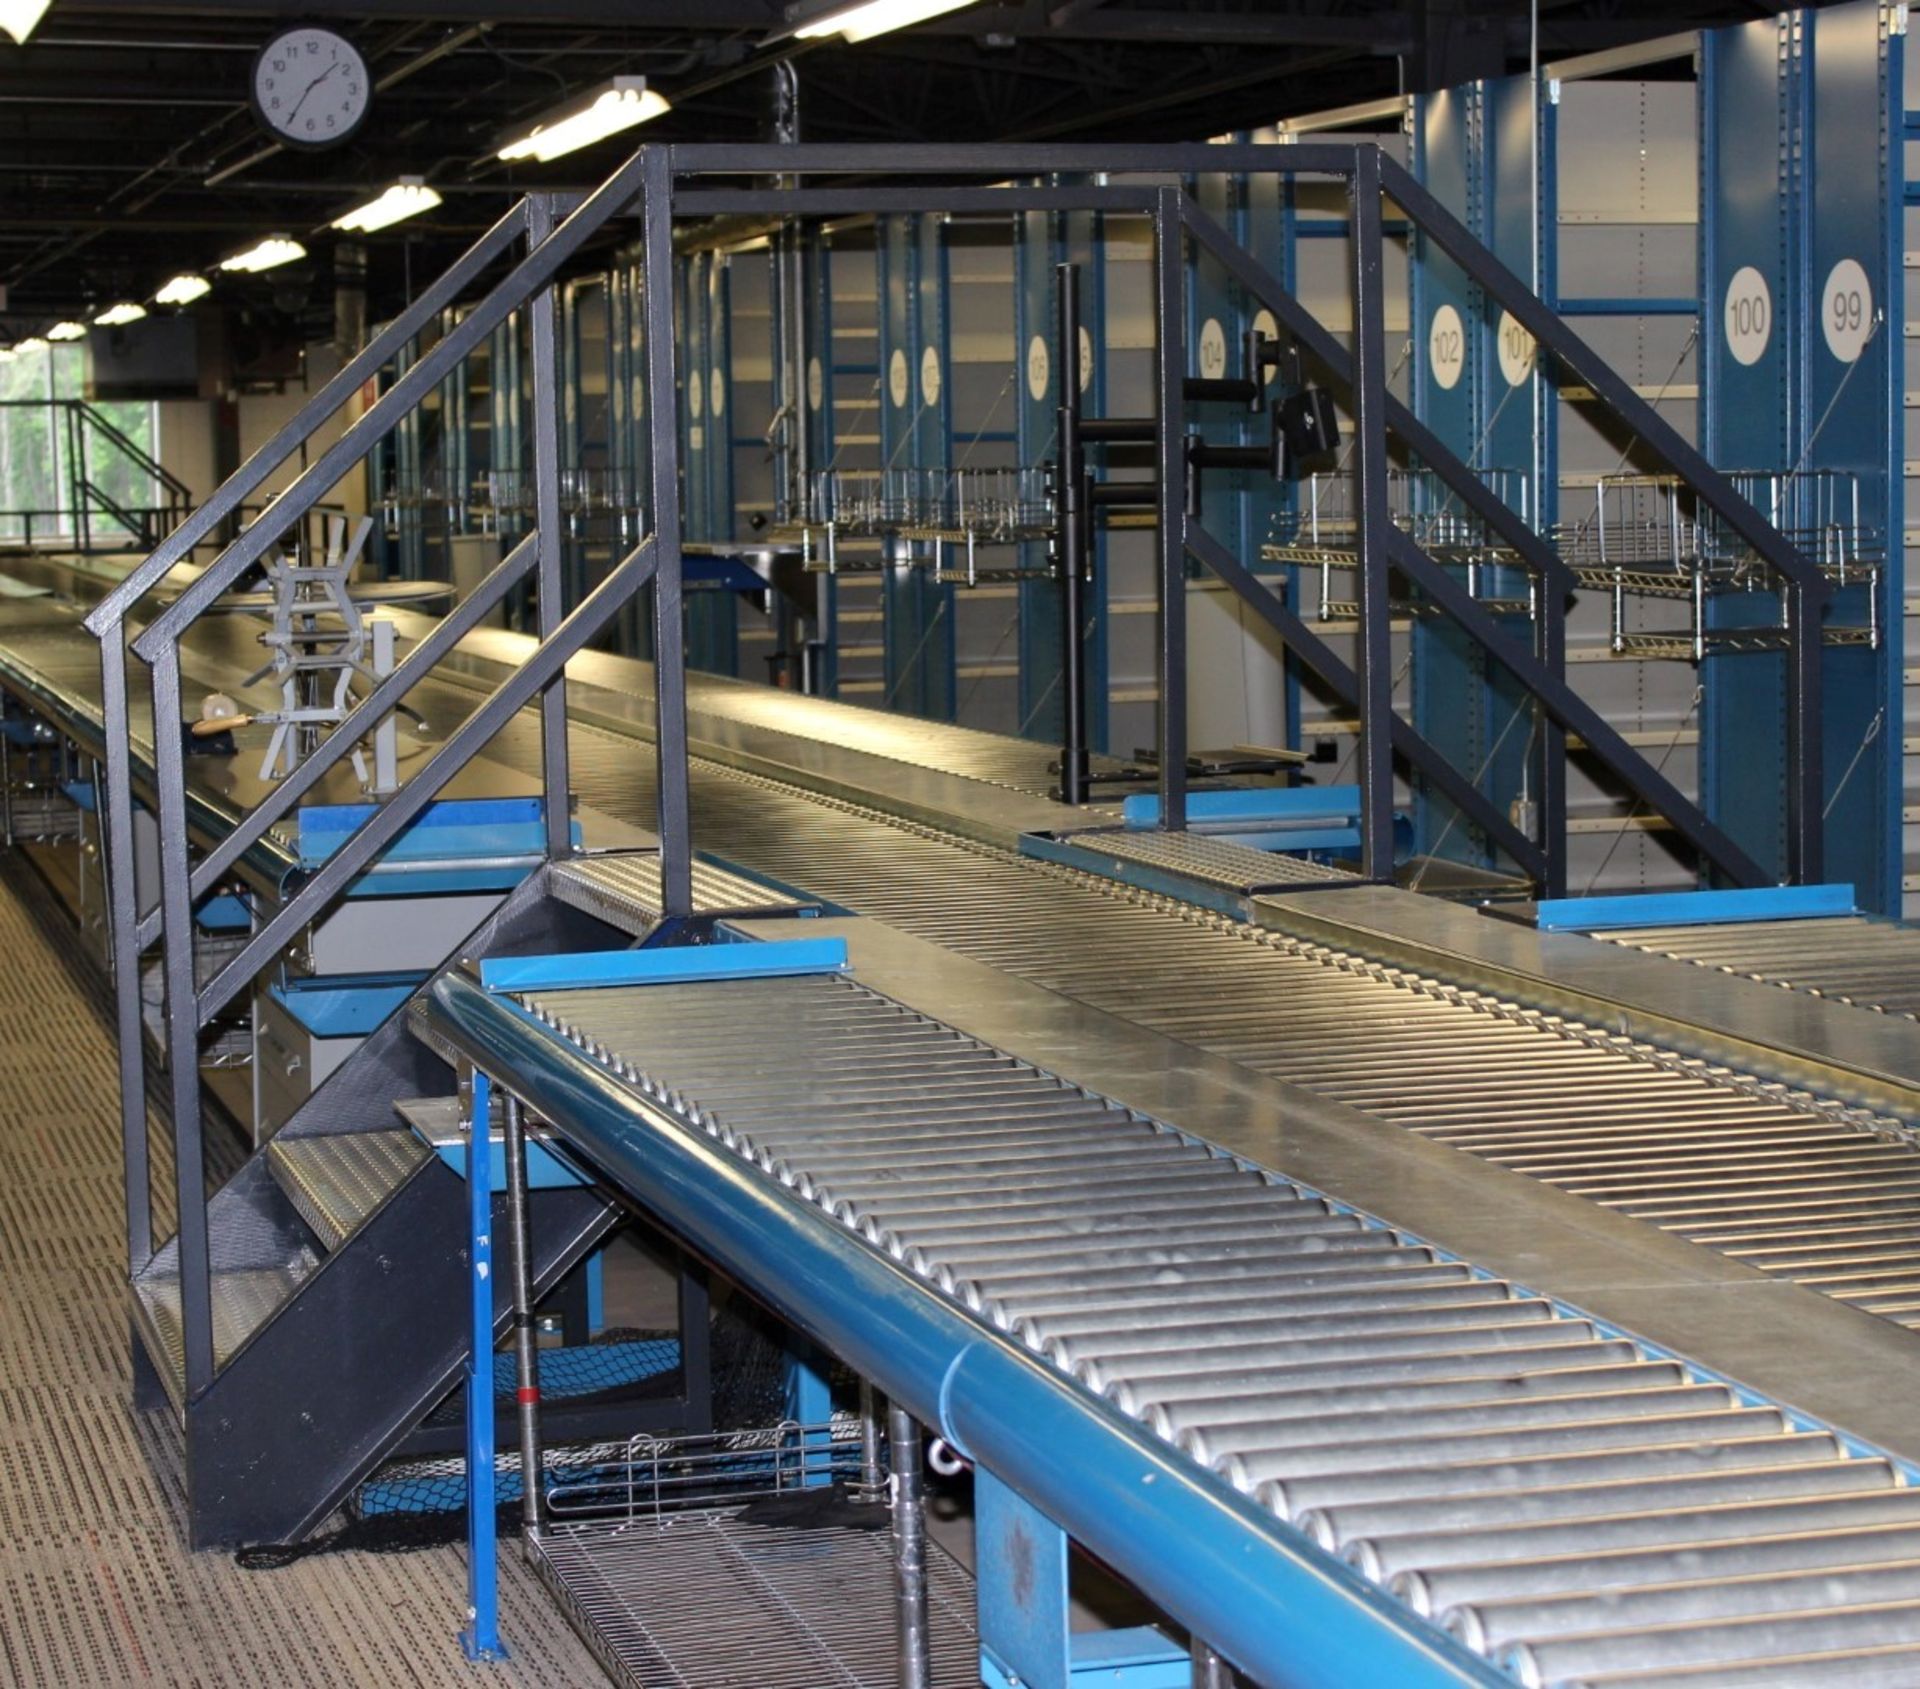 CROSS OVER LADDER FOR 24" WIDE CONVEYOR. 3 PCS, TIMES MONEY - Image 2 of 2